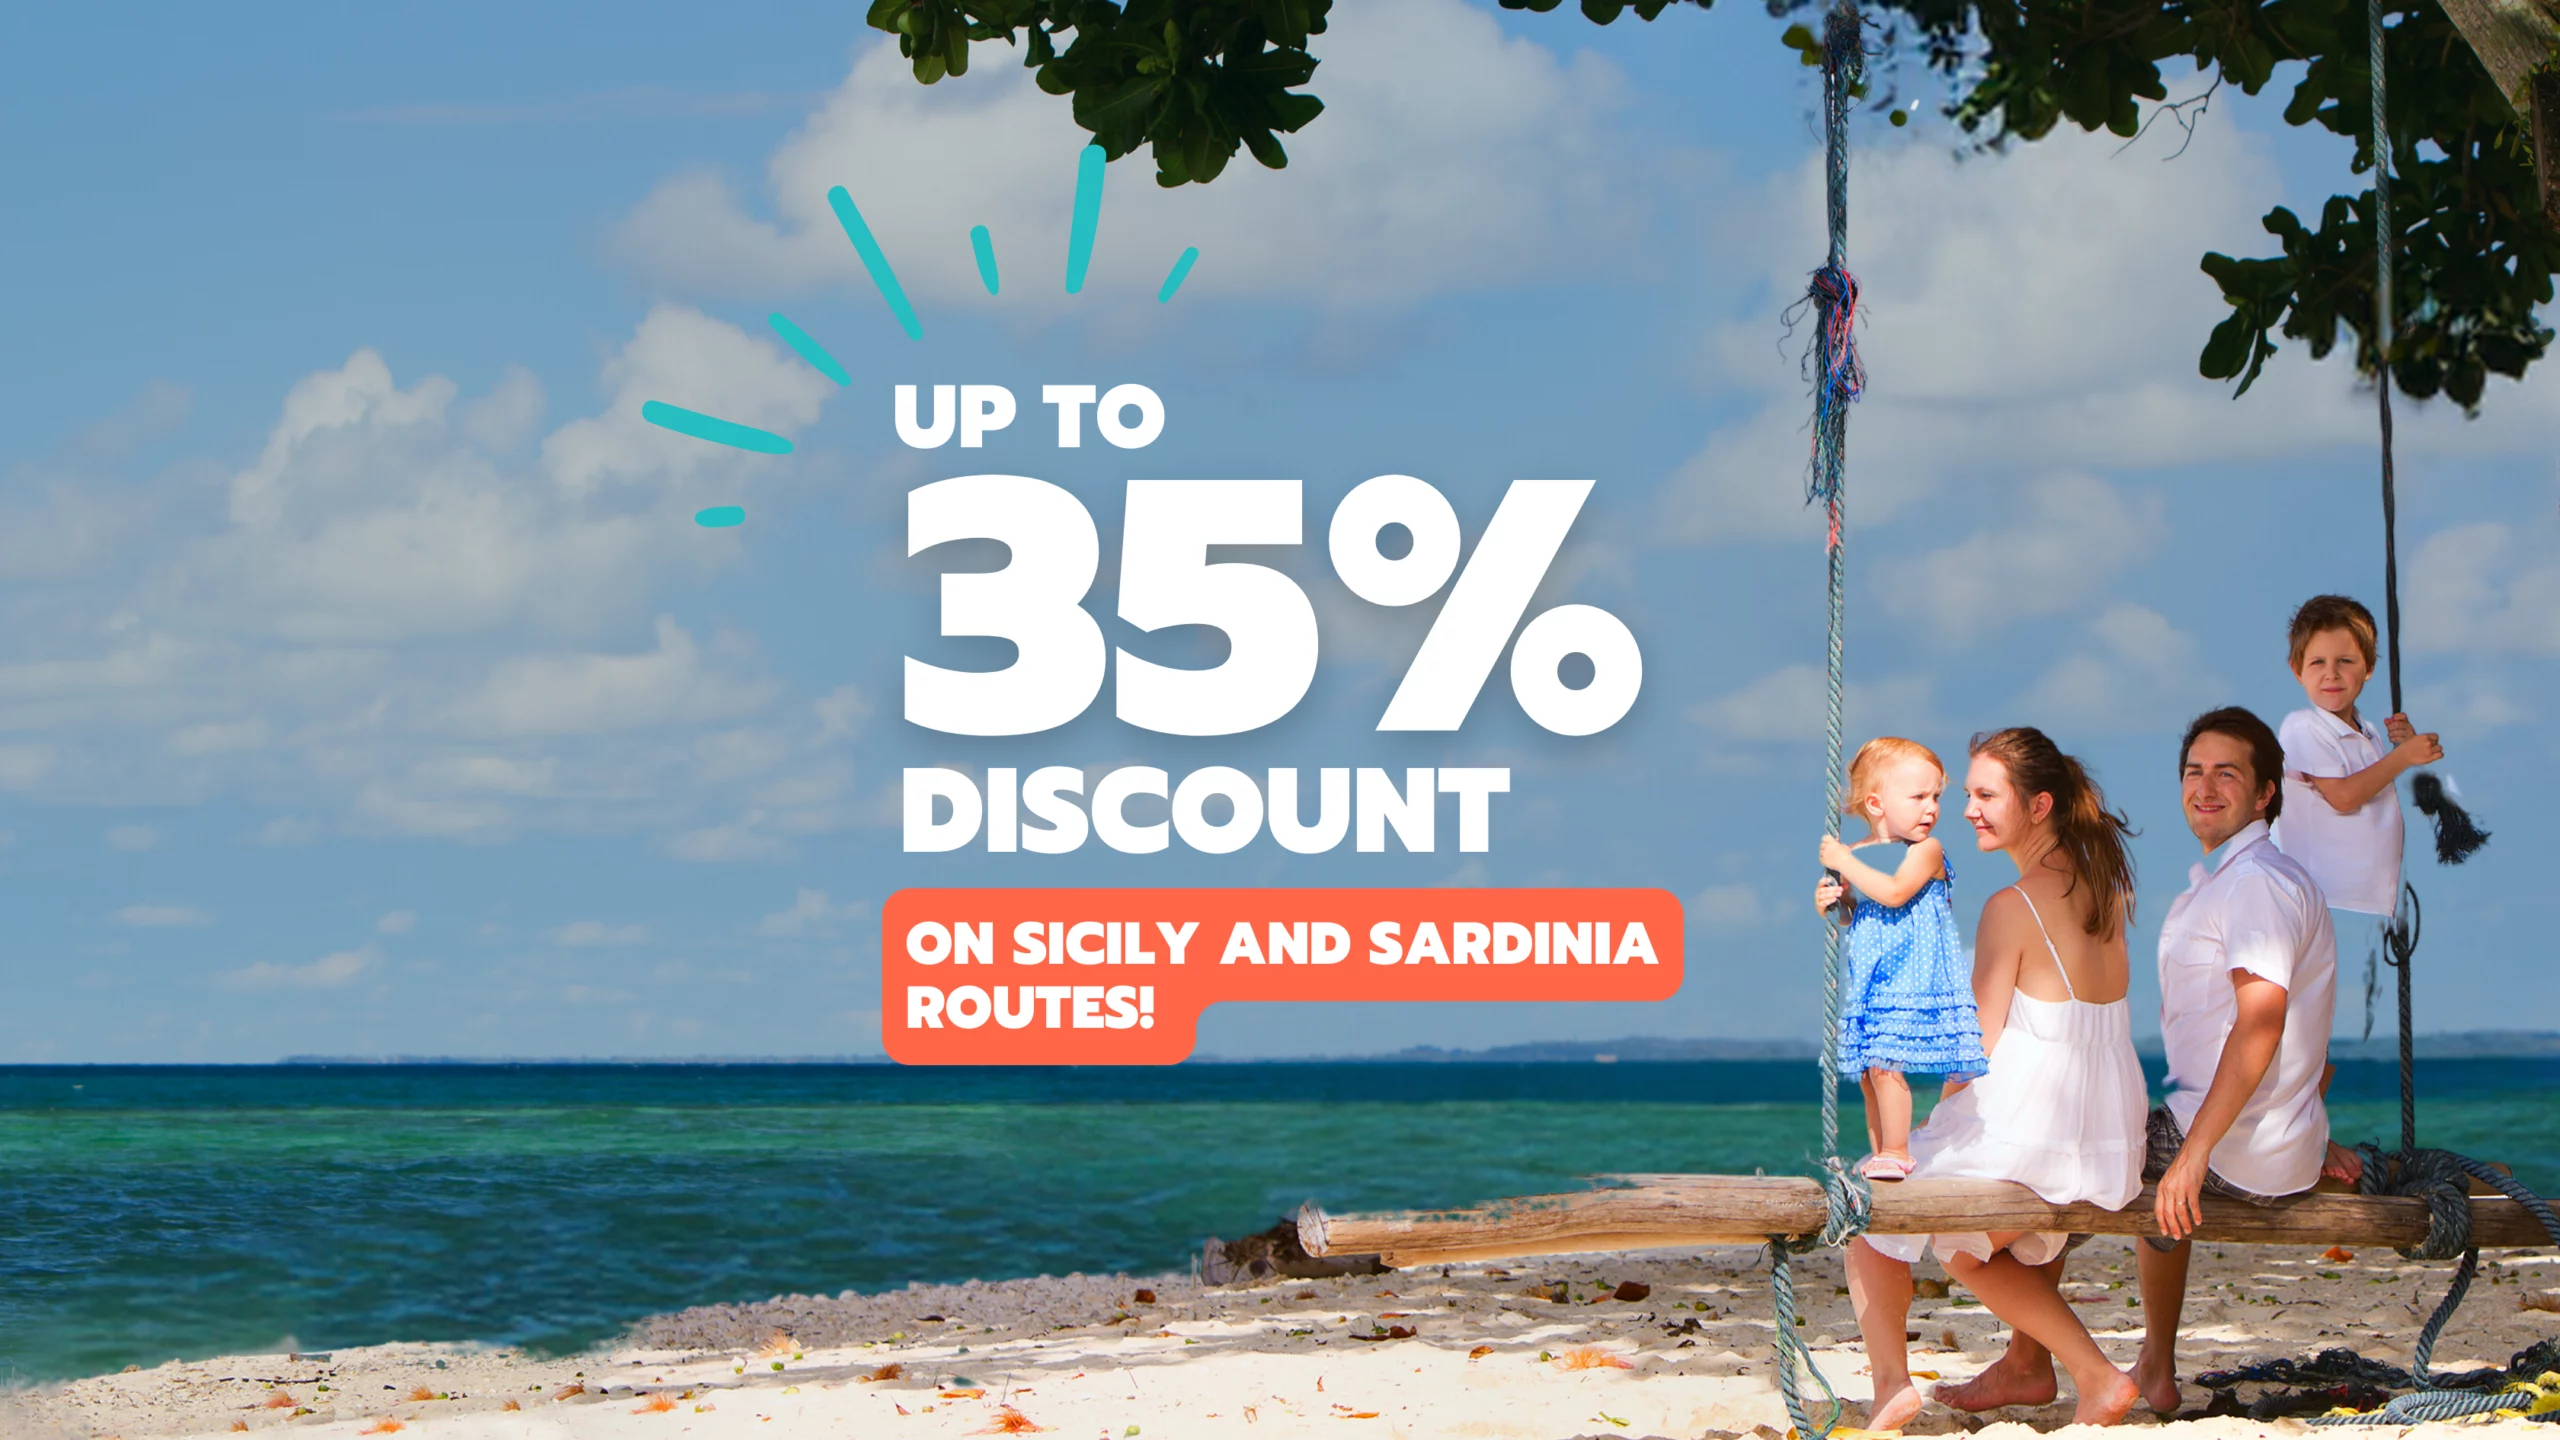 UP TO 35% OFF ON SELECT ROUTES